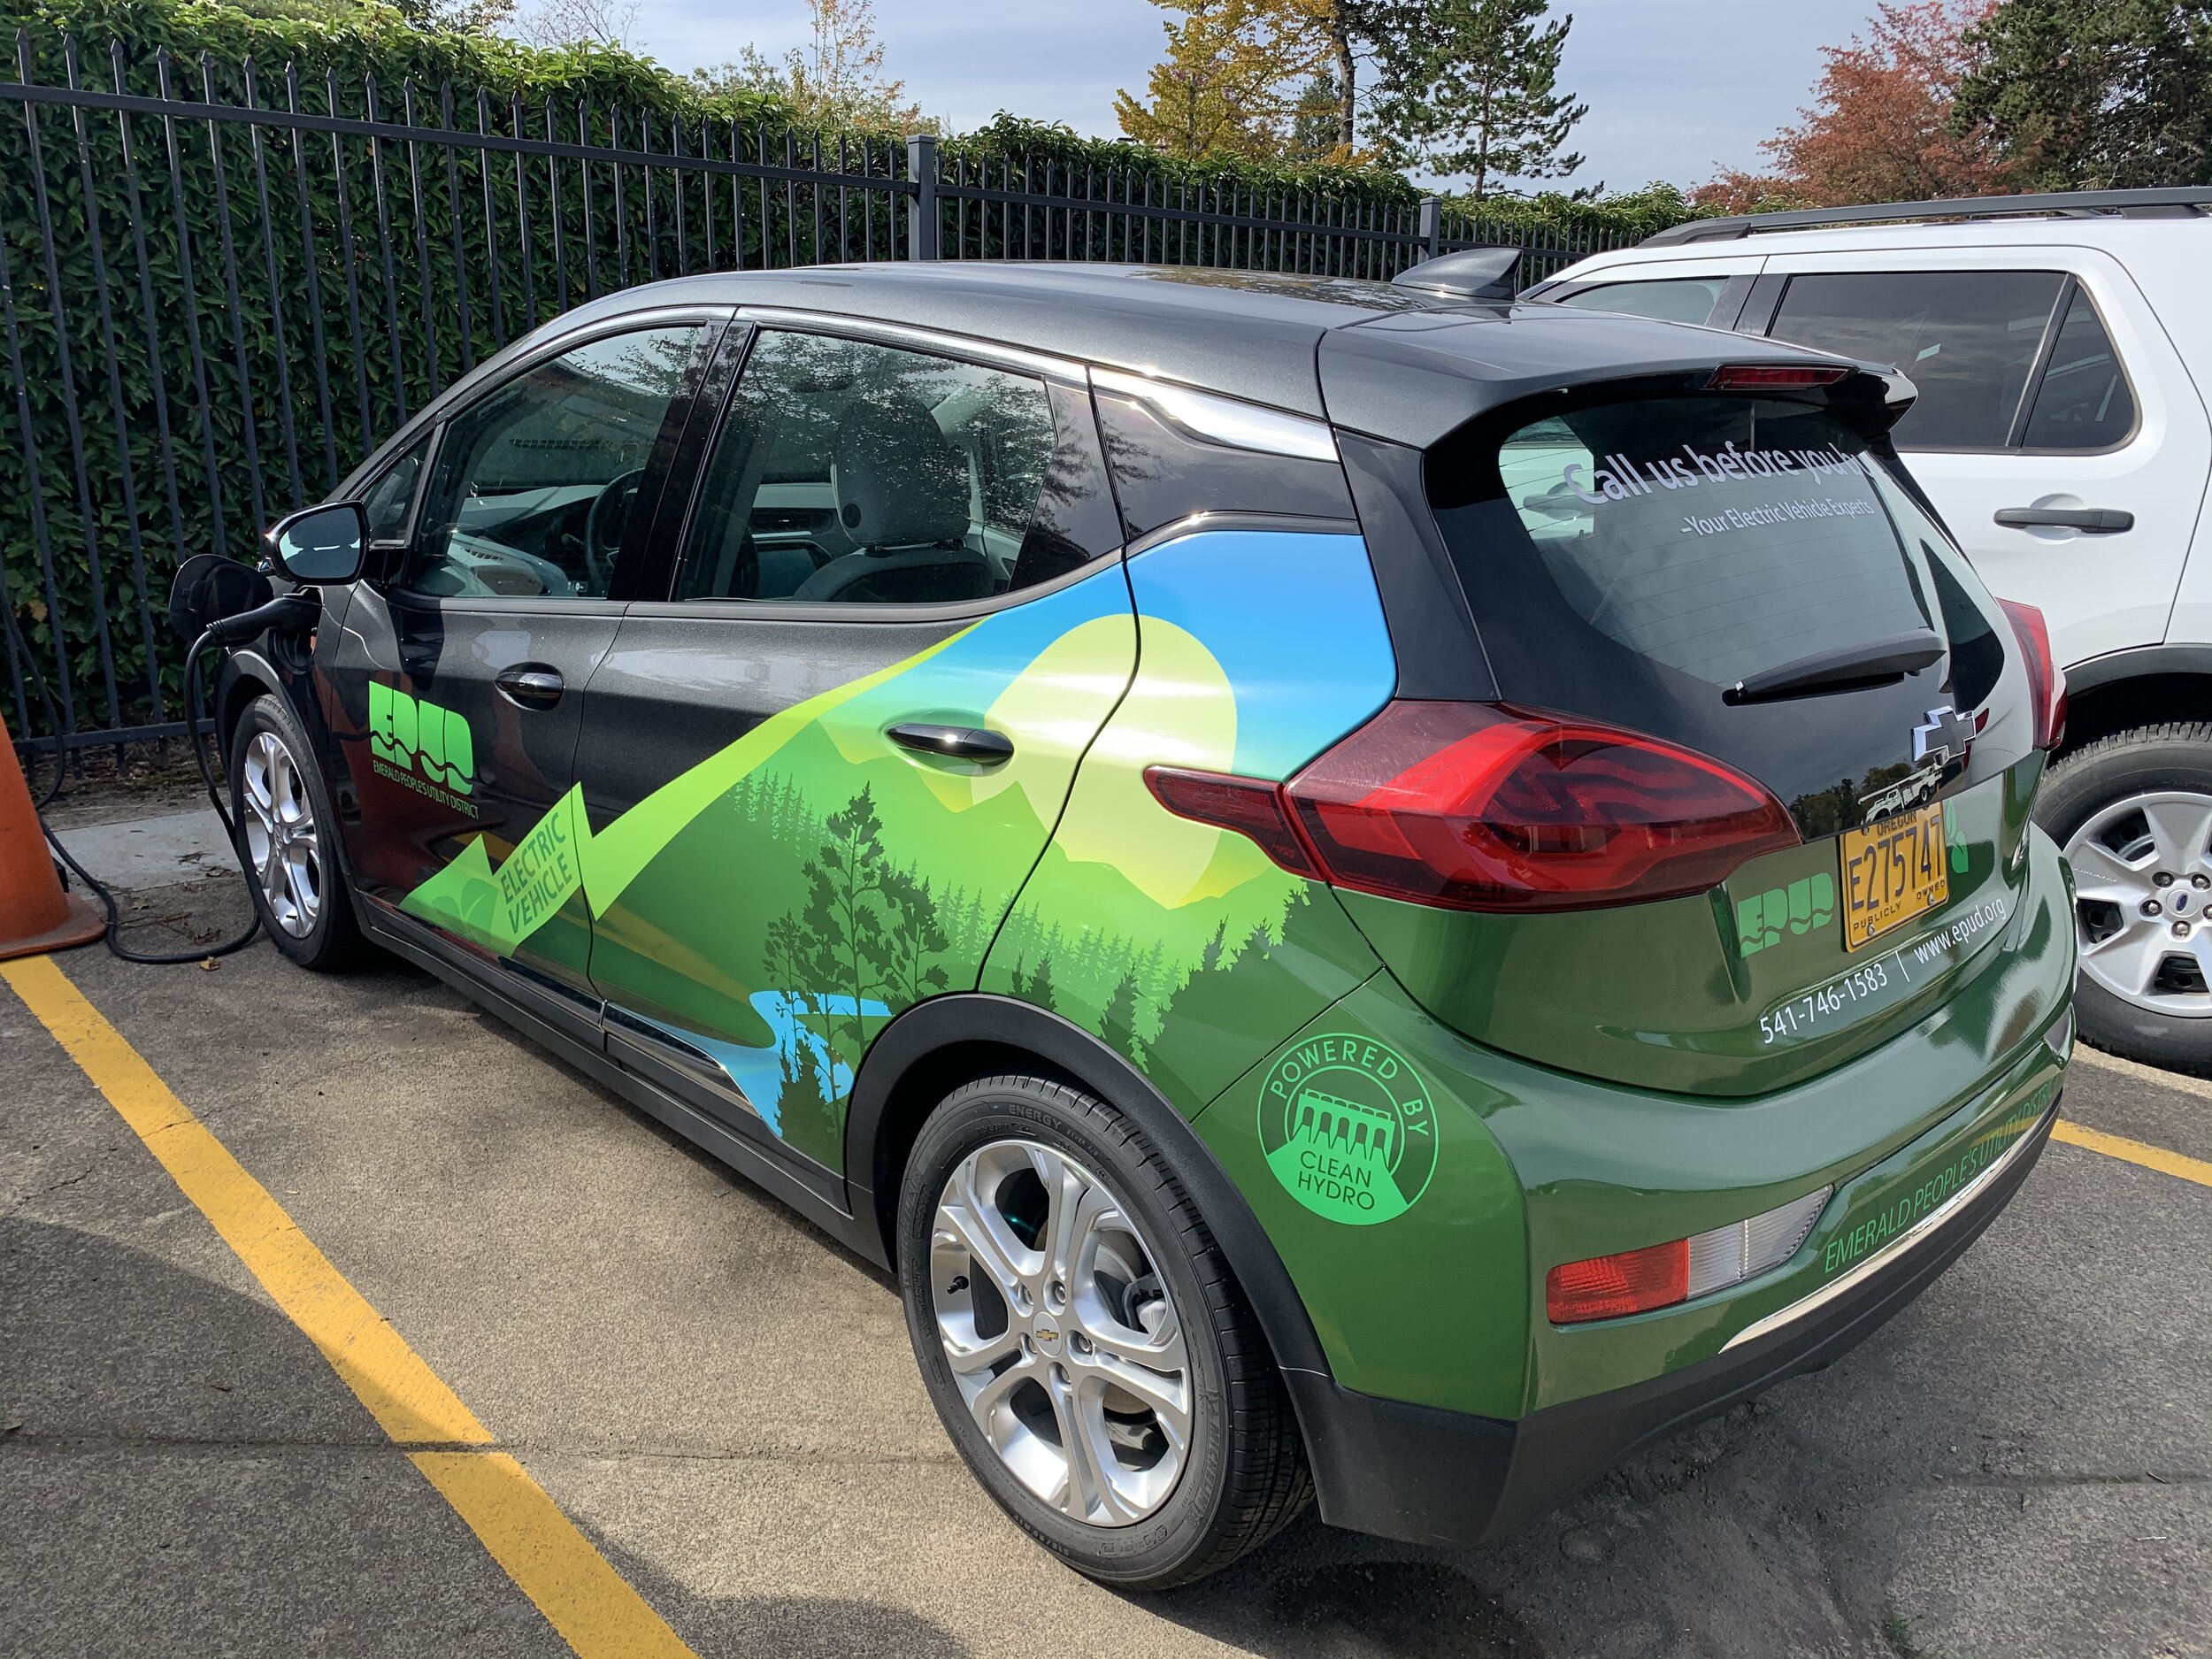 Emerald PUD's fleet includes all-electric Chevy Bolts